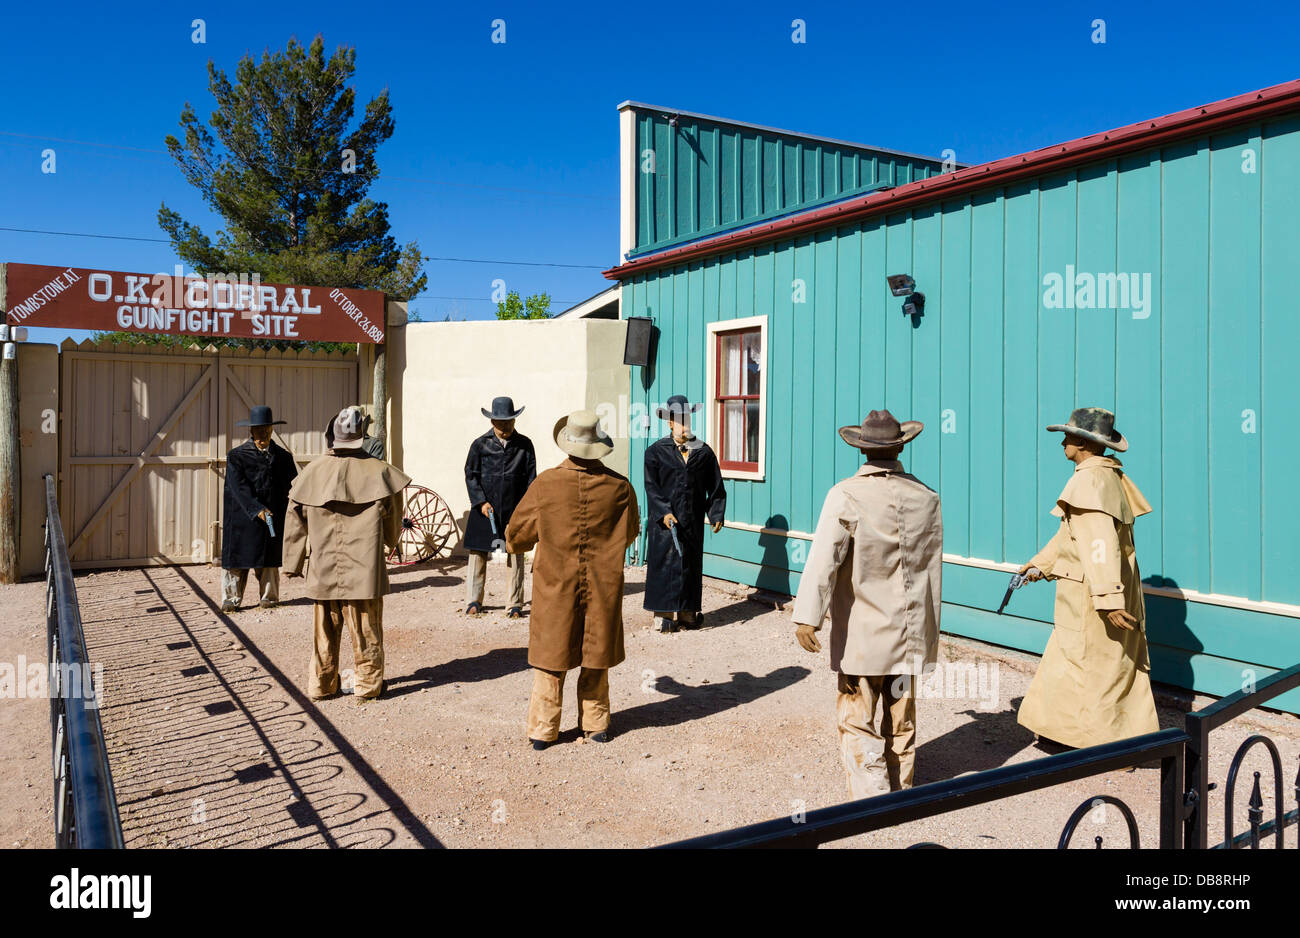 Mannequins depicting the gunfight at the OK Corral, Tombstone, Arizona, USA Stock Photo